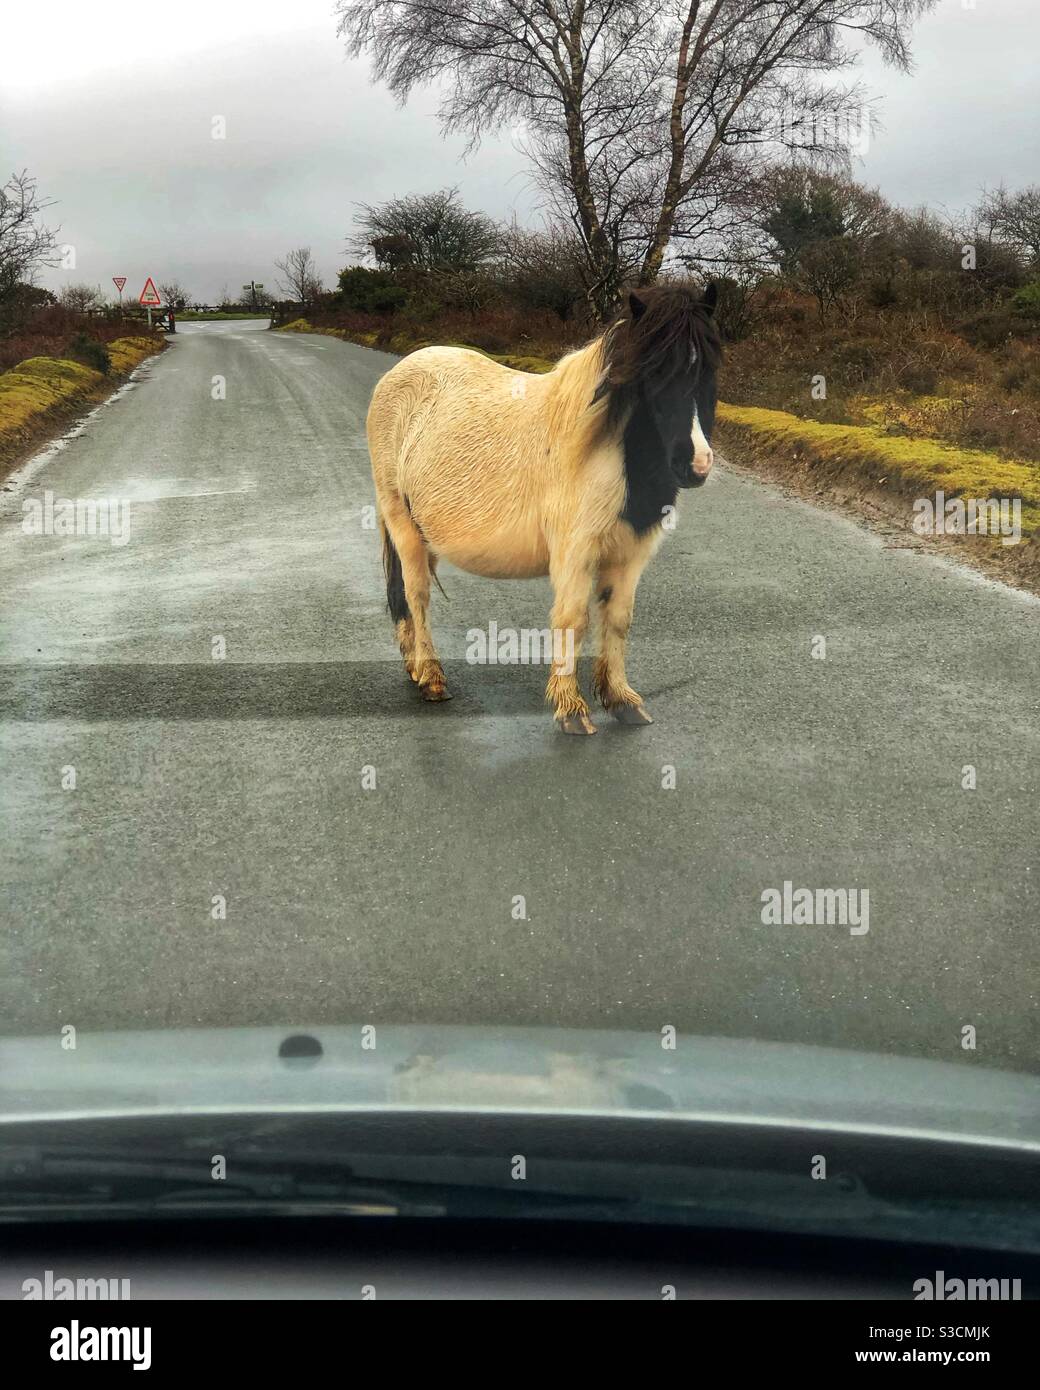 Dartmoor pony standing in the middle of the road holding up traffic. Stock Photo